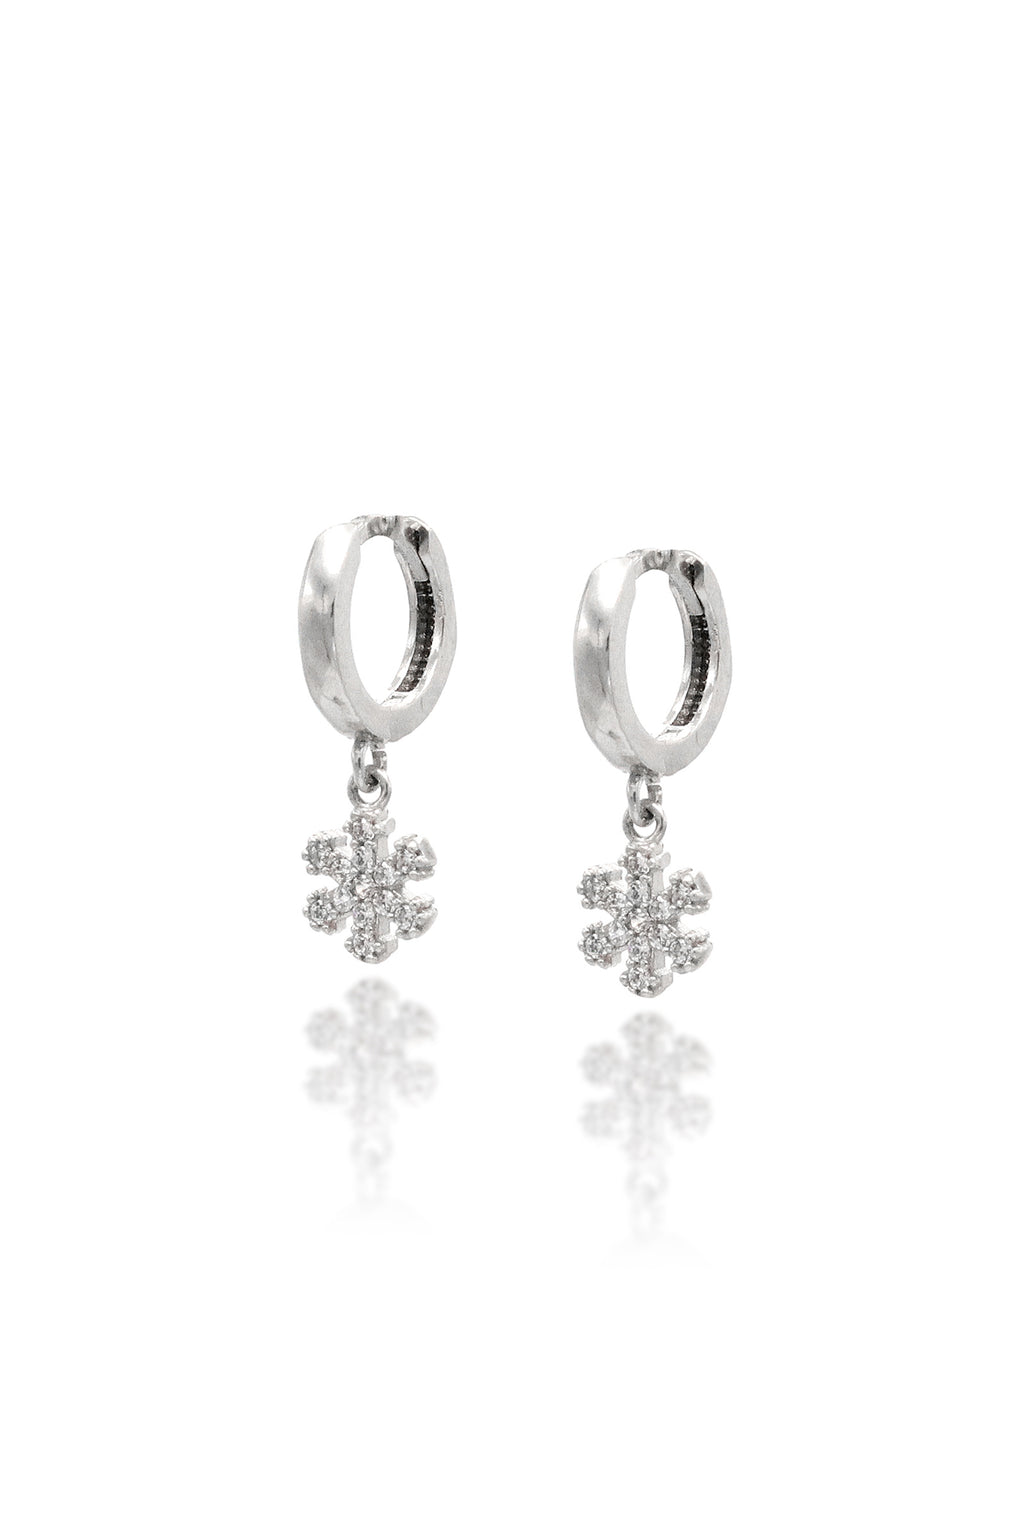 Snow Flake Model Silver Earrings With Zircon (NG201019480)